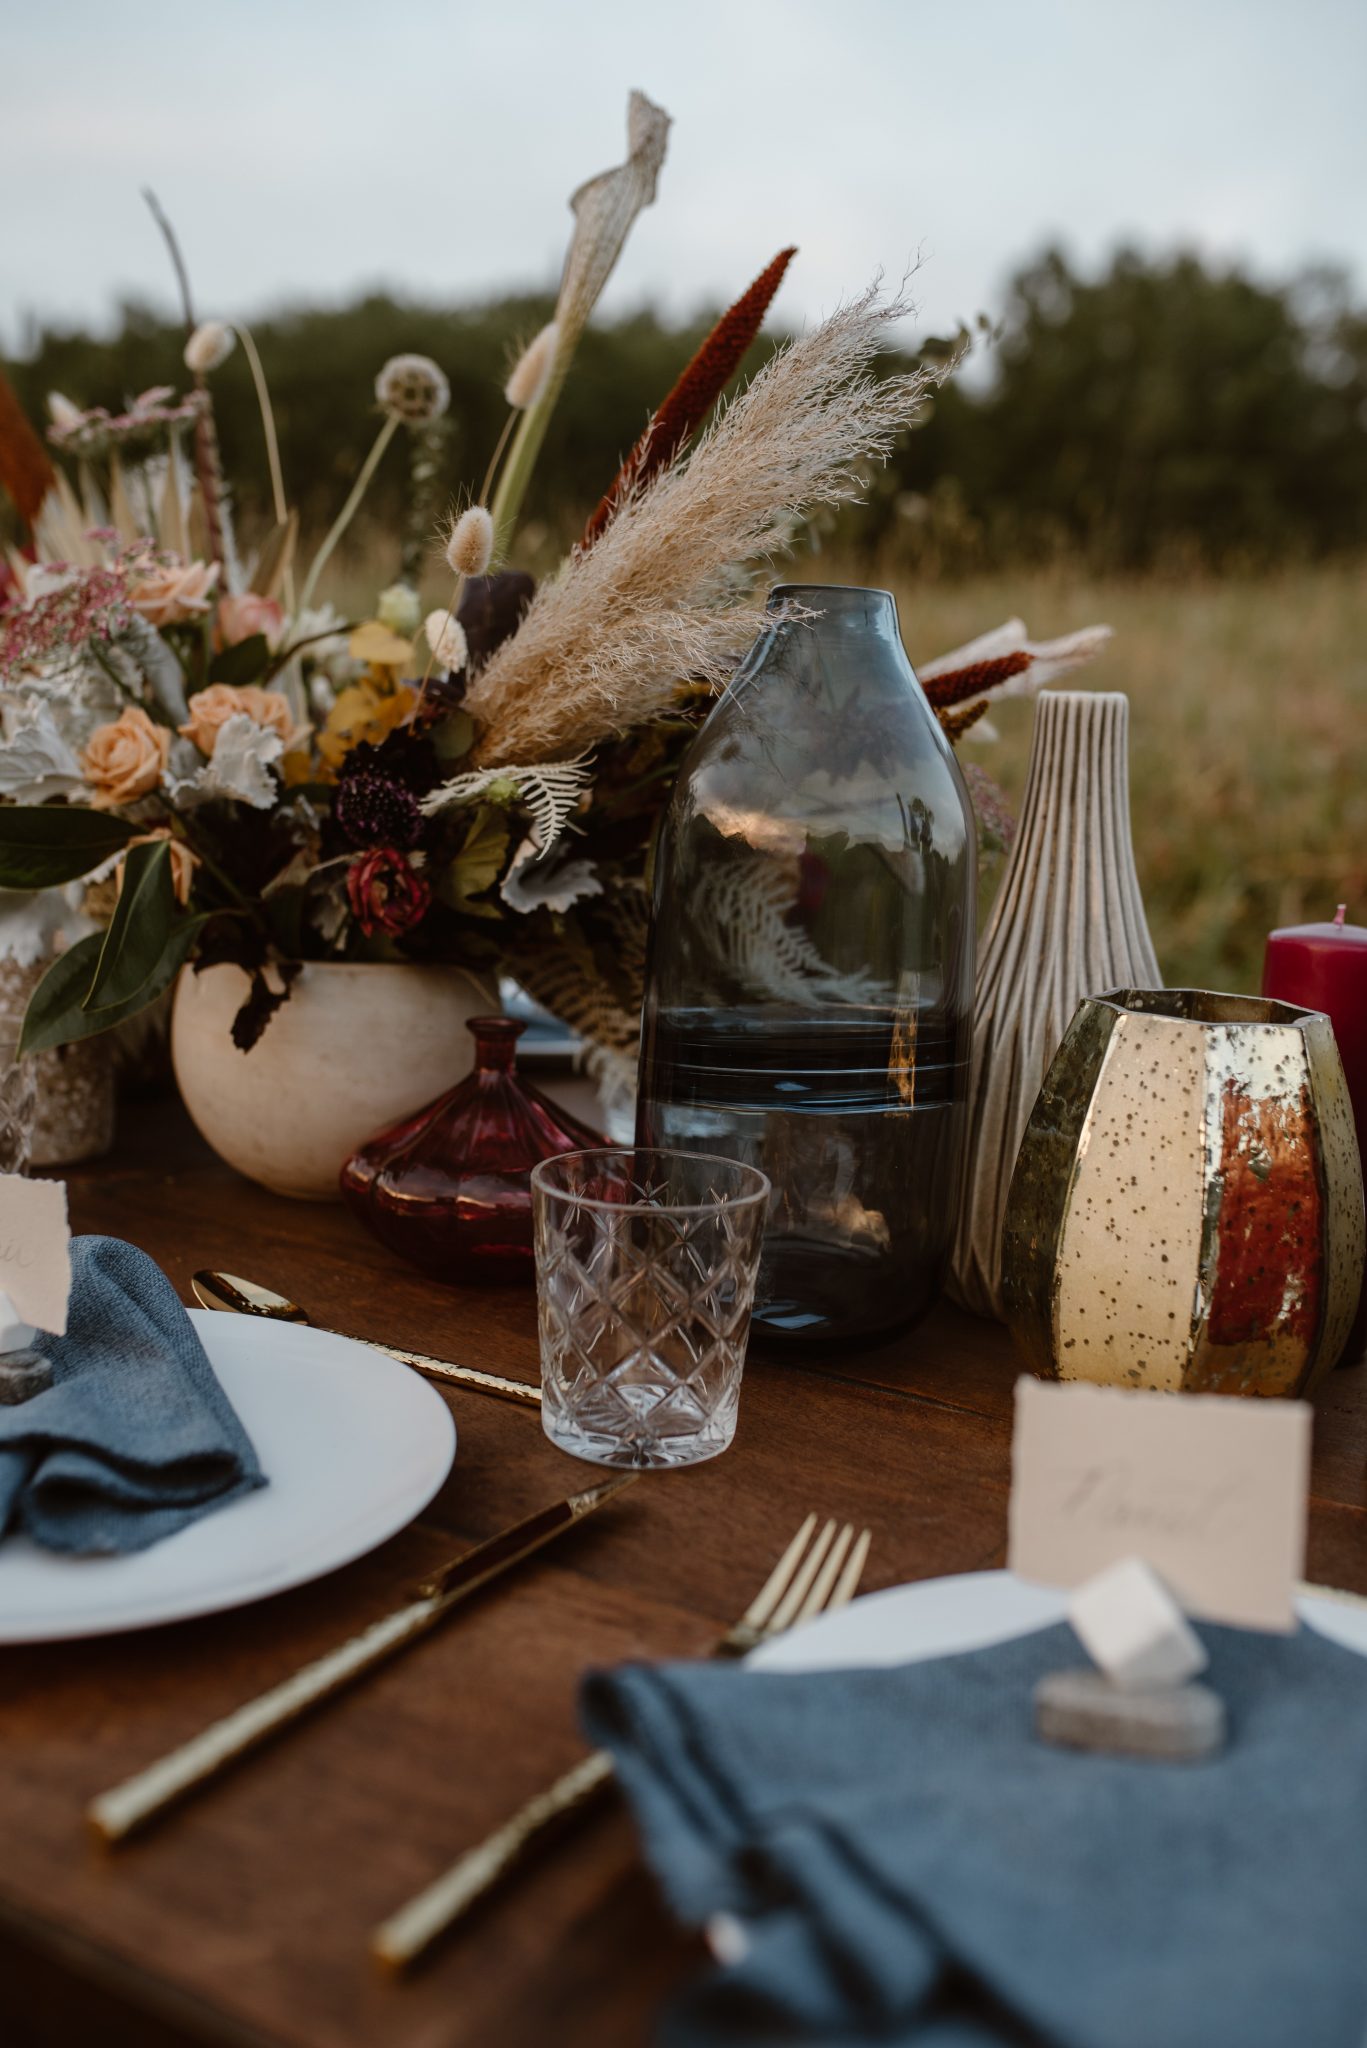 Earthy and Eclectic Moroccan Elopement at Big Horn Lookout featured on Brontë Bride - moroccan inspired, eclectic elopement, elopement inspiration